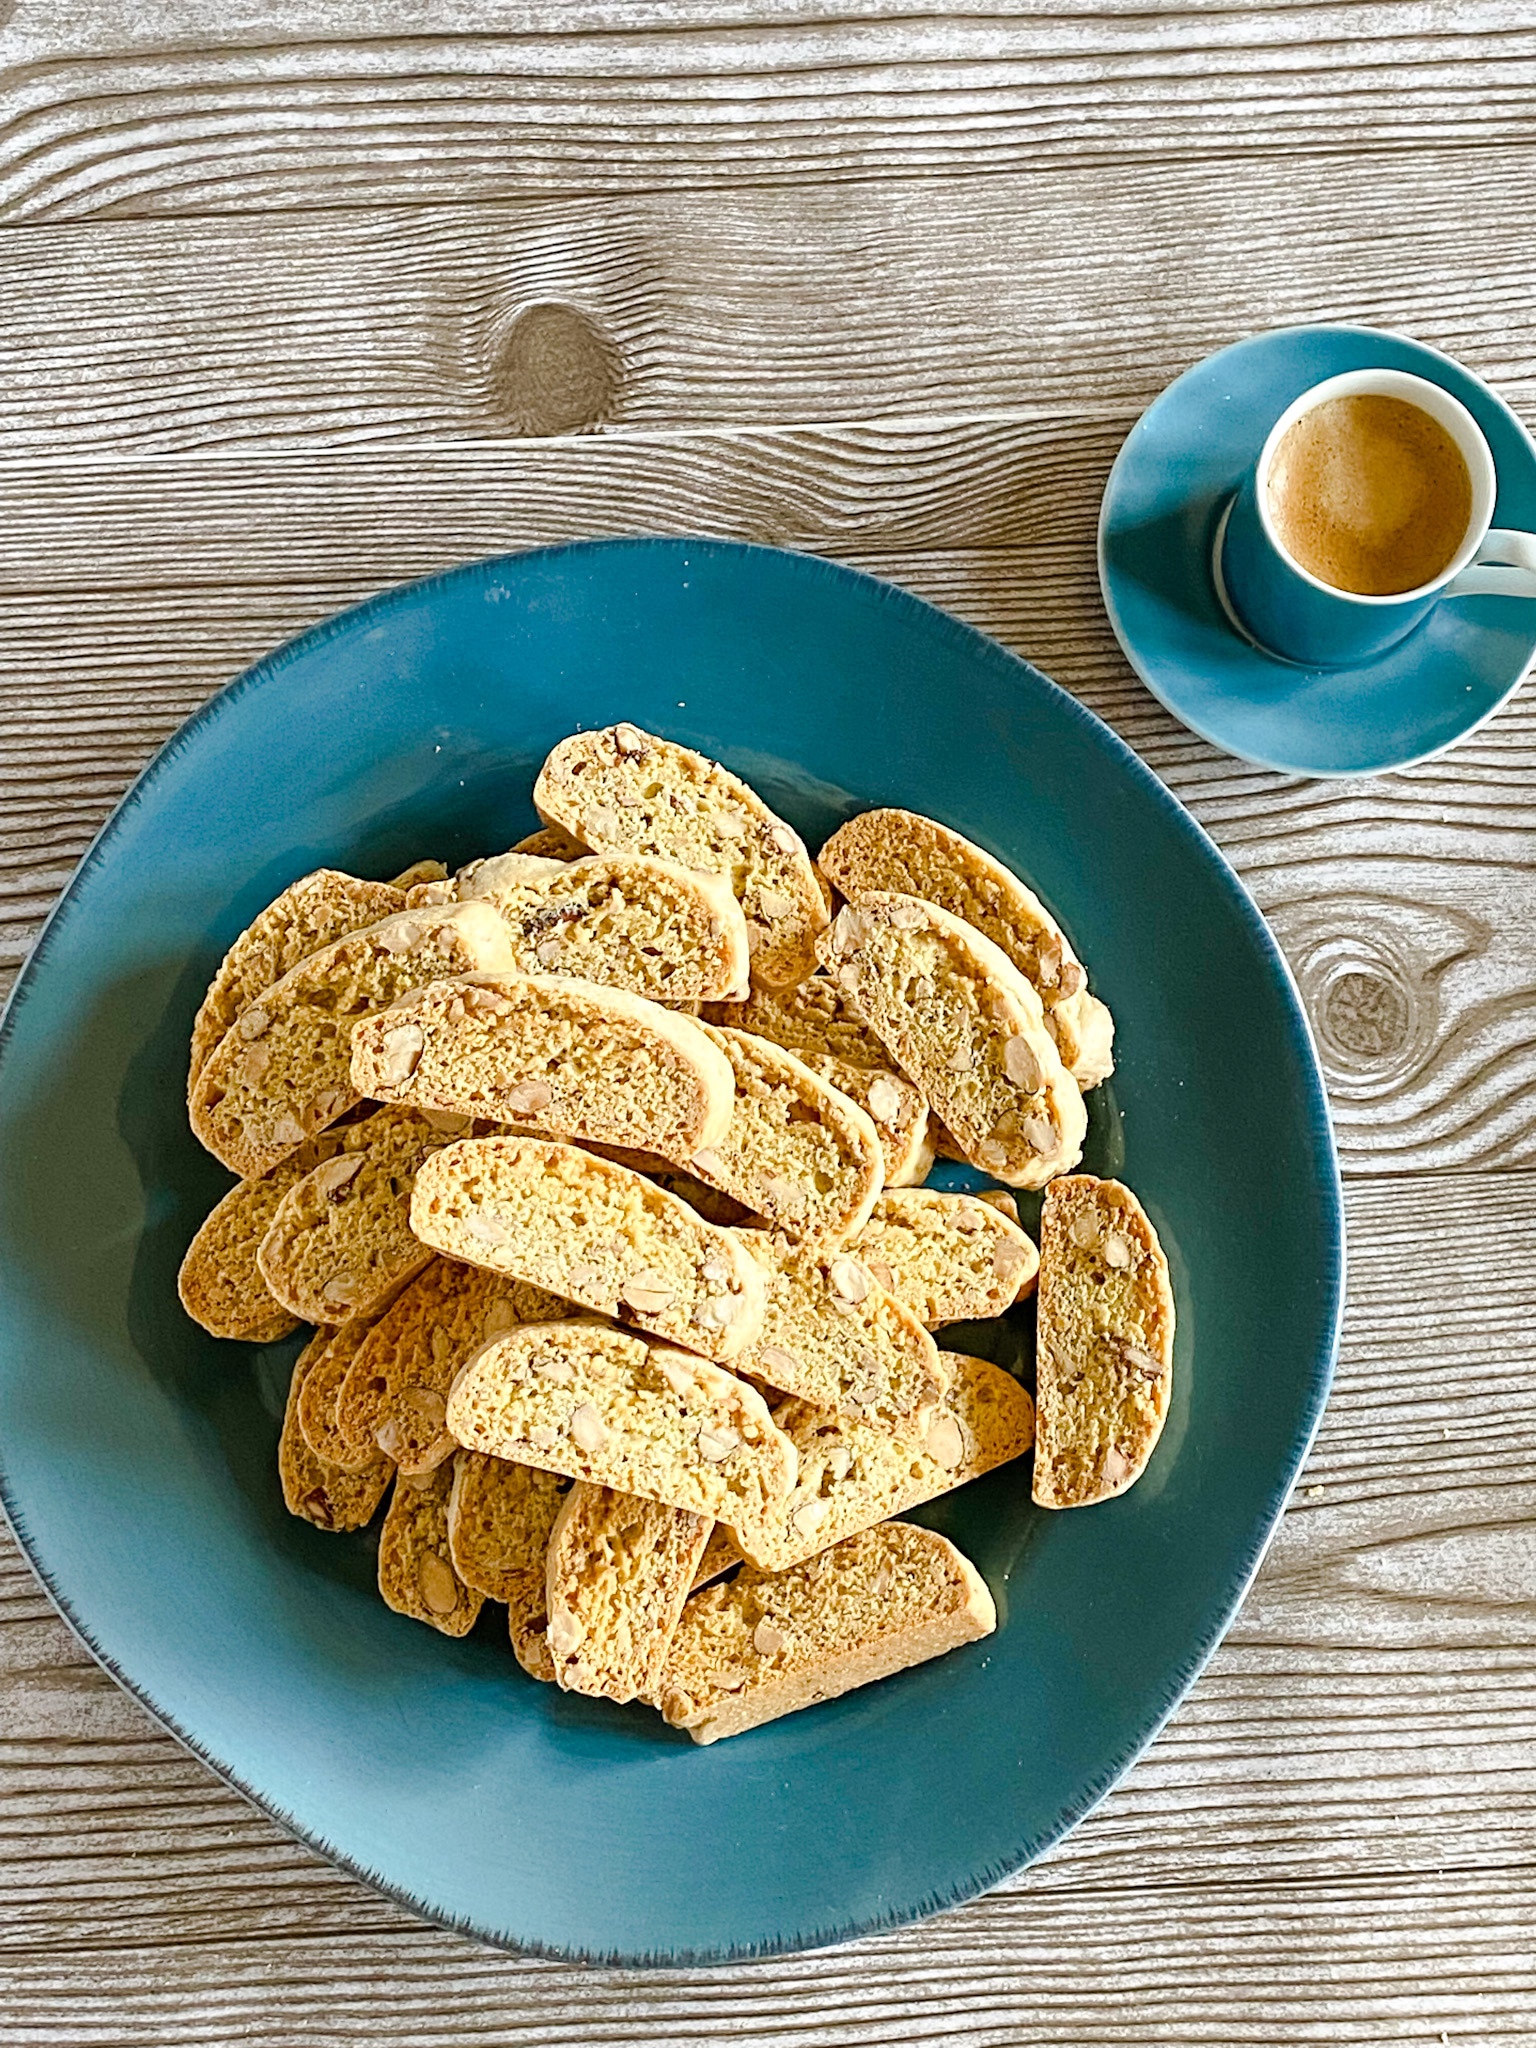 Mini almond biscotti piled on a blue plate on a woodgrain surface.